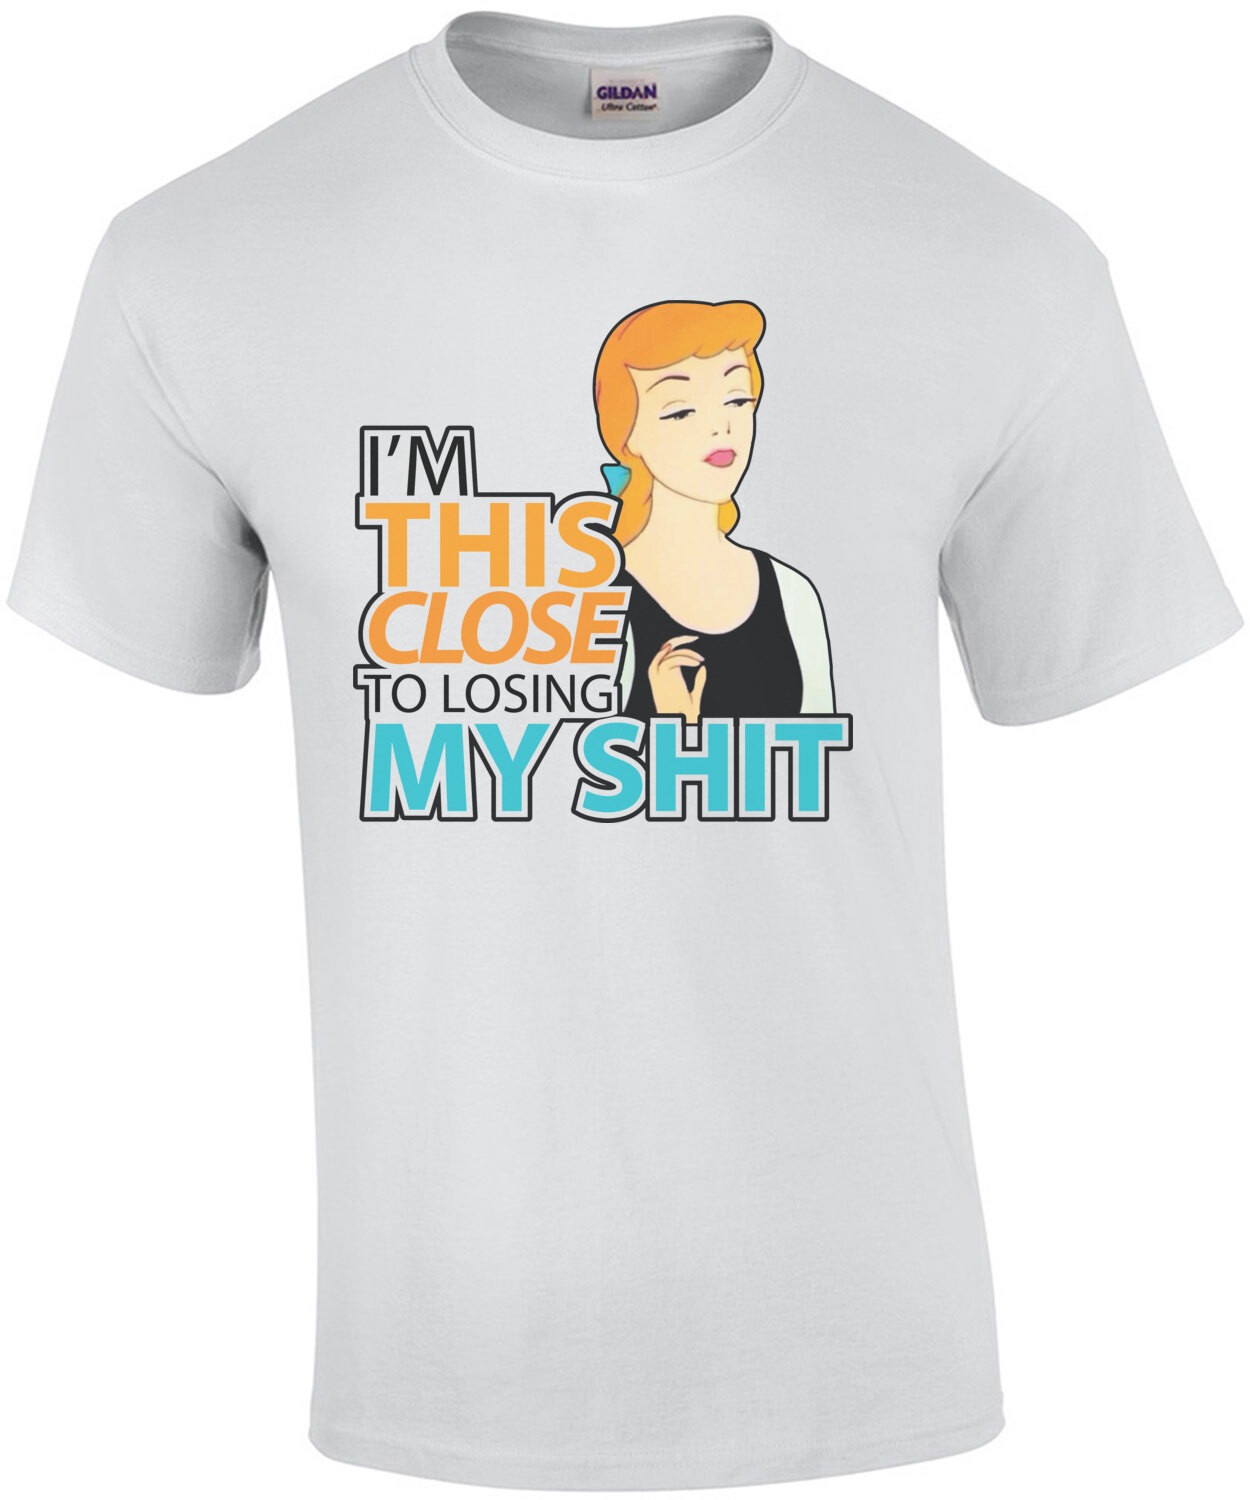 I'm this close to losing my shit - funny ladies t-shirt